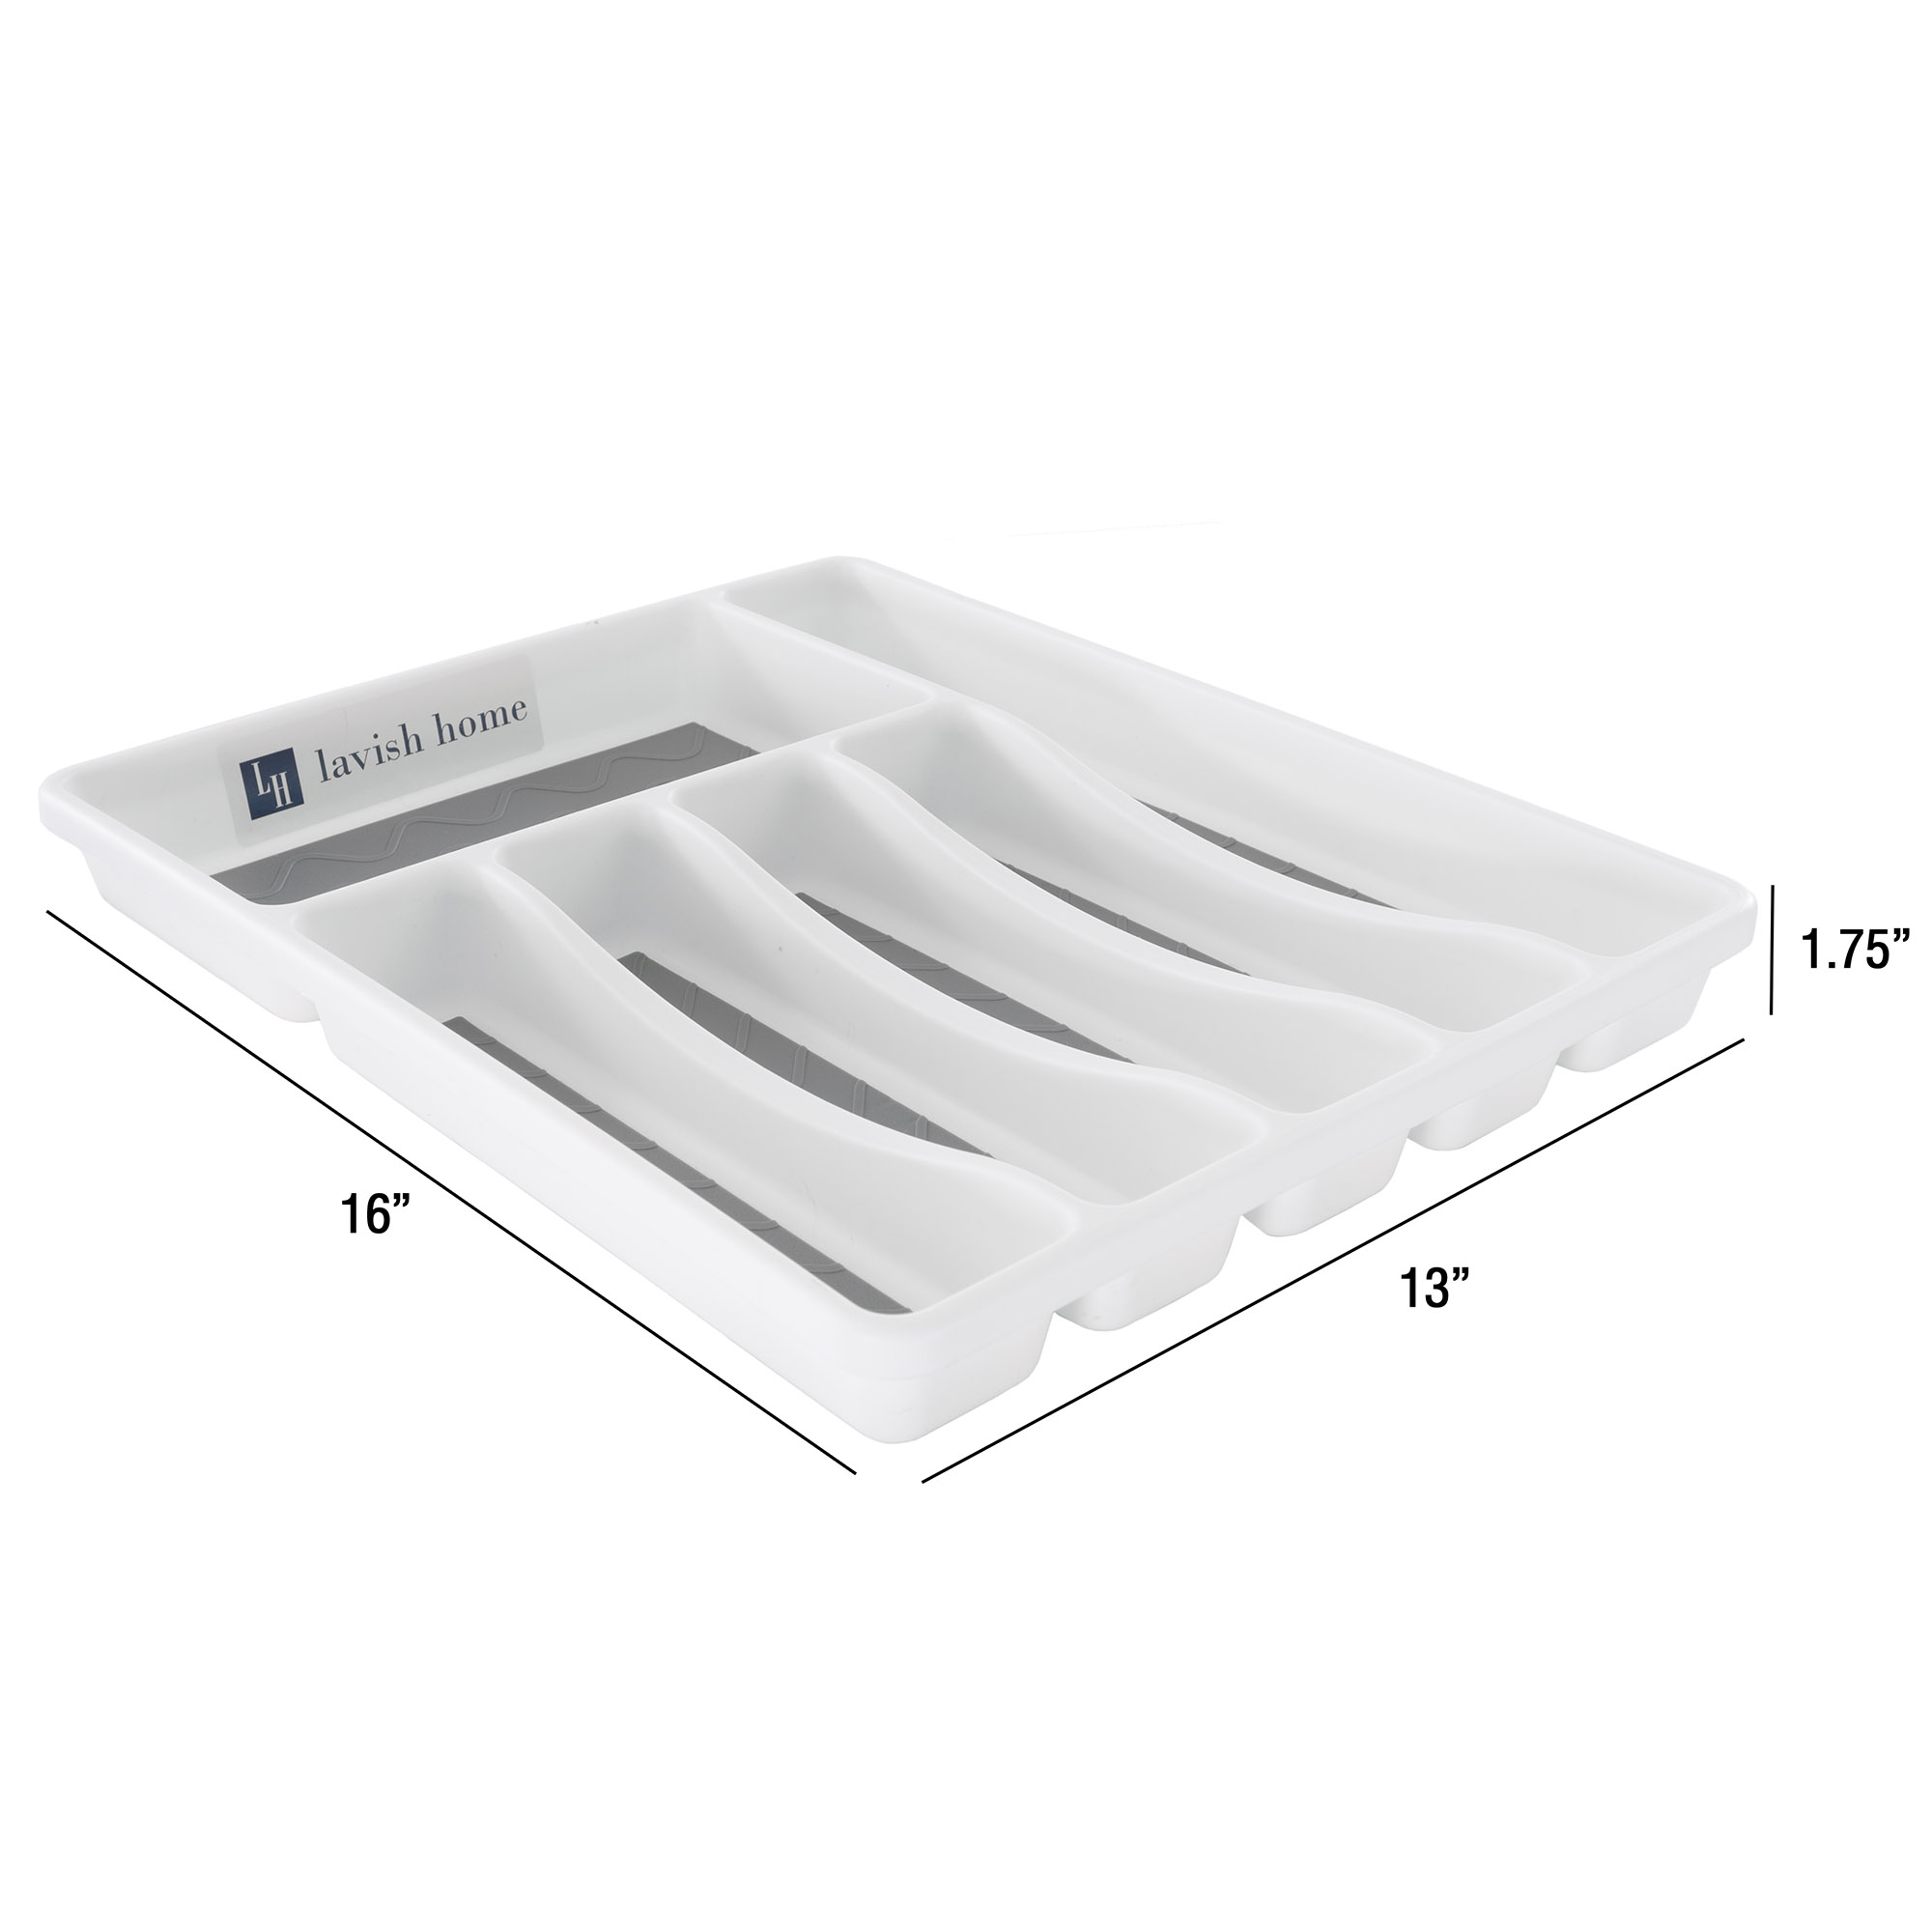 Lavish Home  1.75" Silverware Drawer Organizer with 6 Sections and Nonslip Tray - image 4 of 4